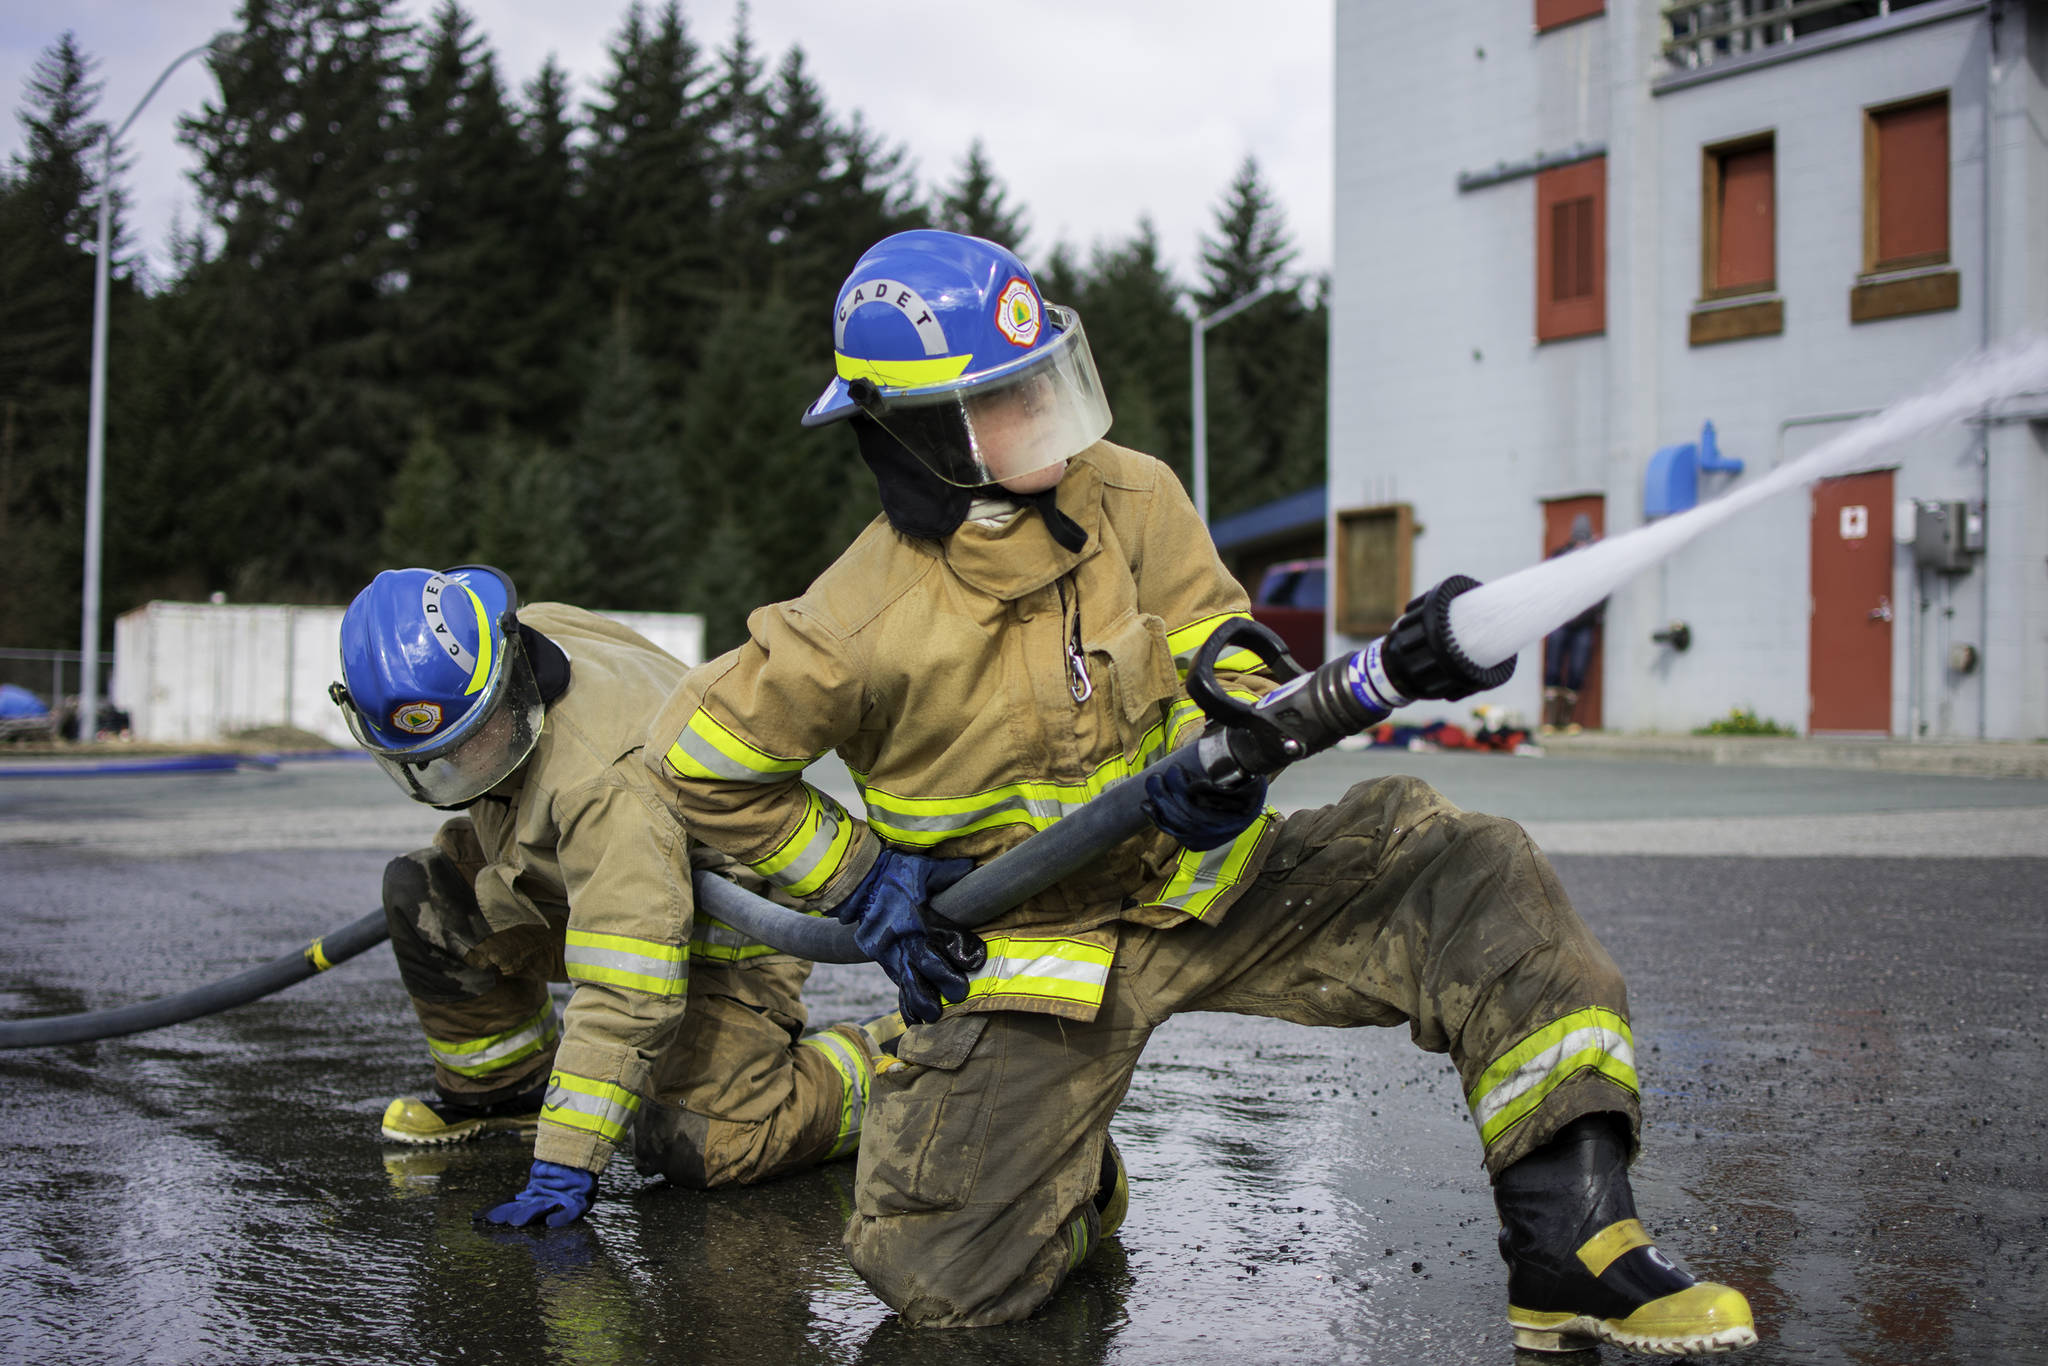 JDHS student Finn Adam (left) and homeschool student James Zuiderduin (right), Capital City Fire/Rescue cadets, practice advancing a hose under pressure at their final day of training with the CCFR on Saturday, April 21, 2018. (Richard McGrail | Juneau Empire)